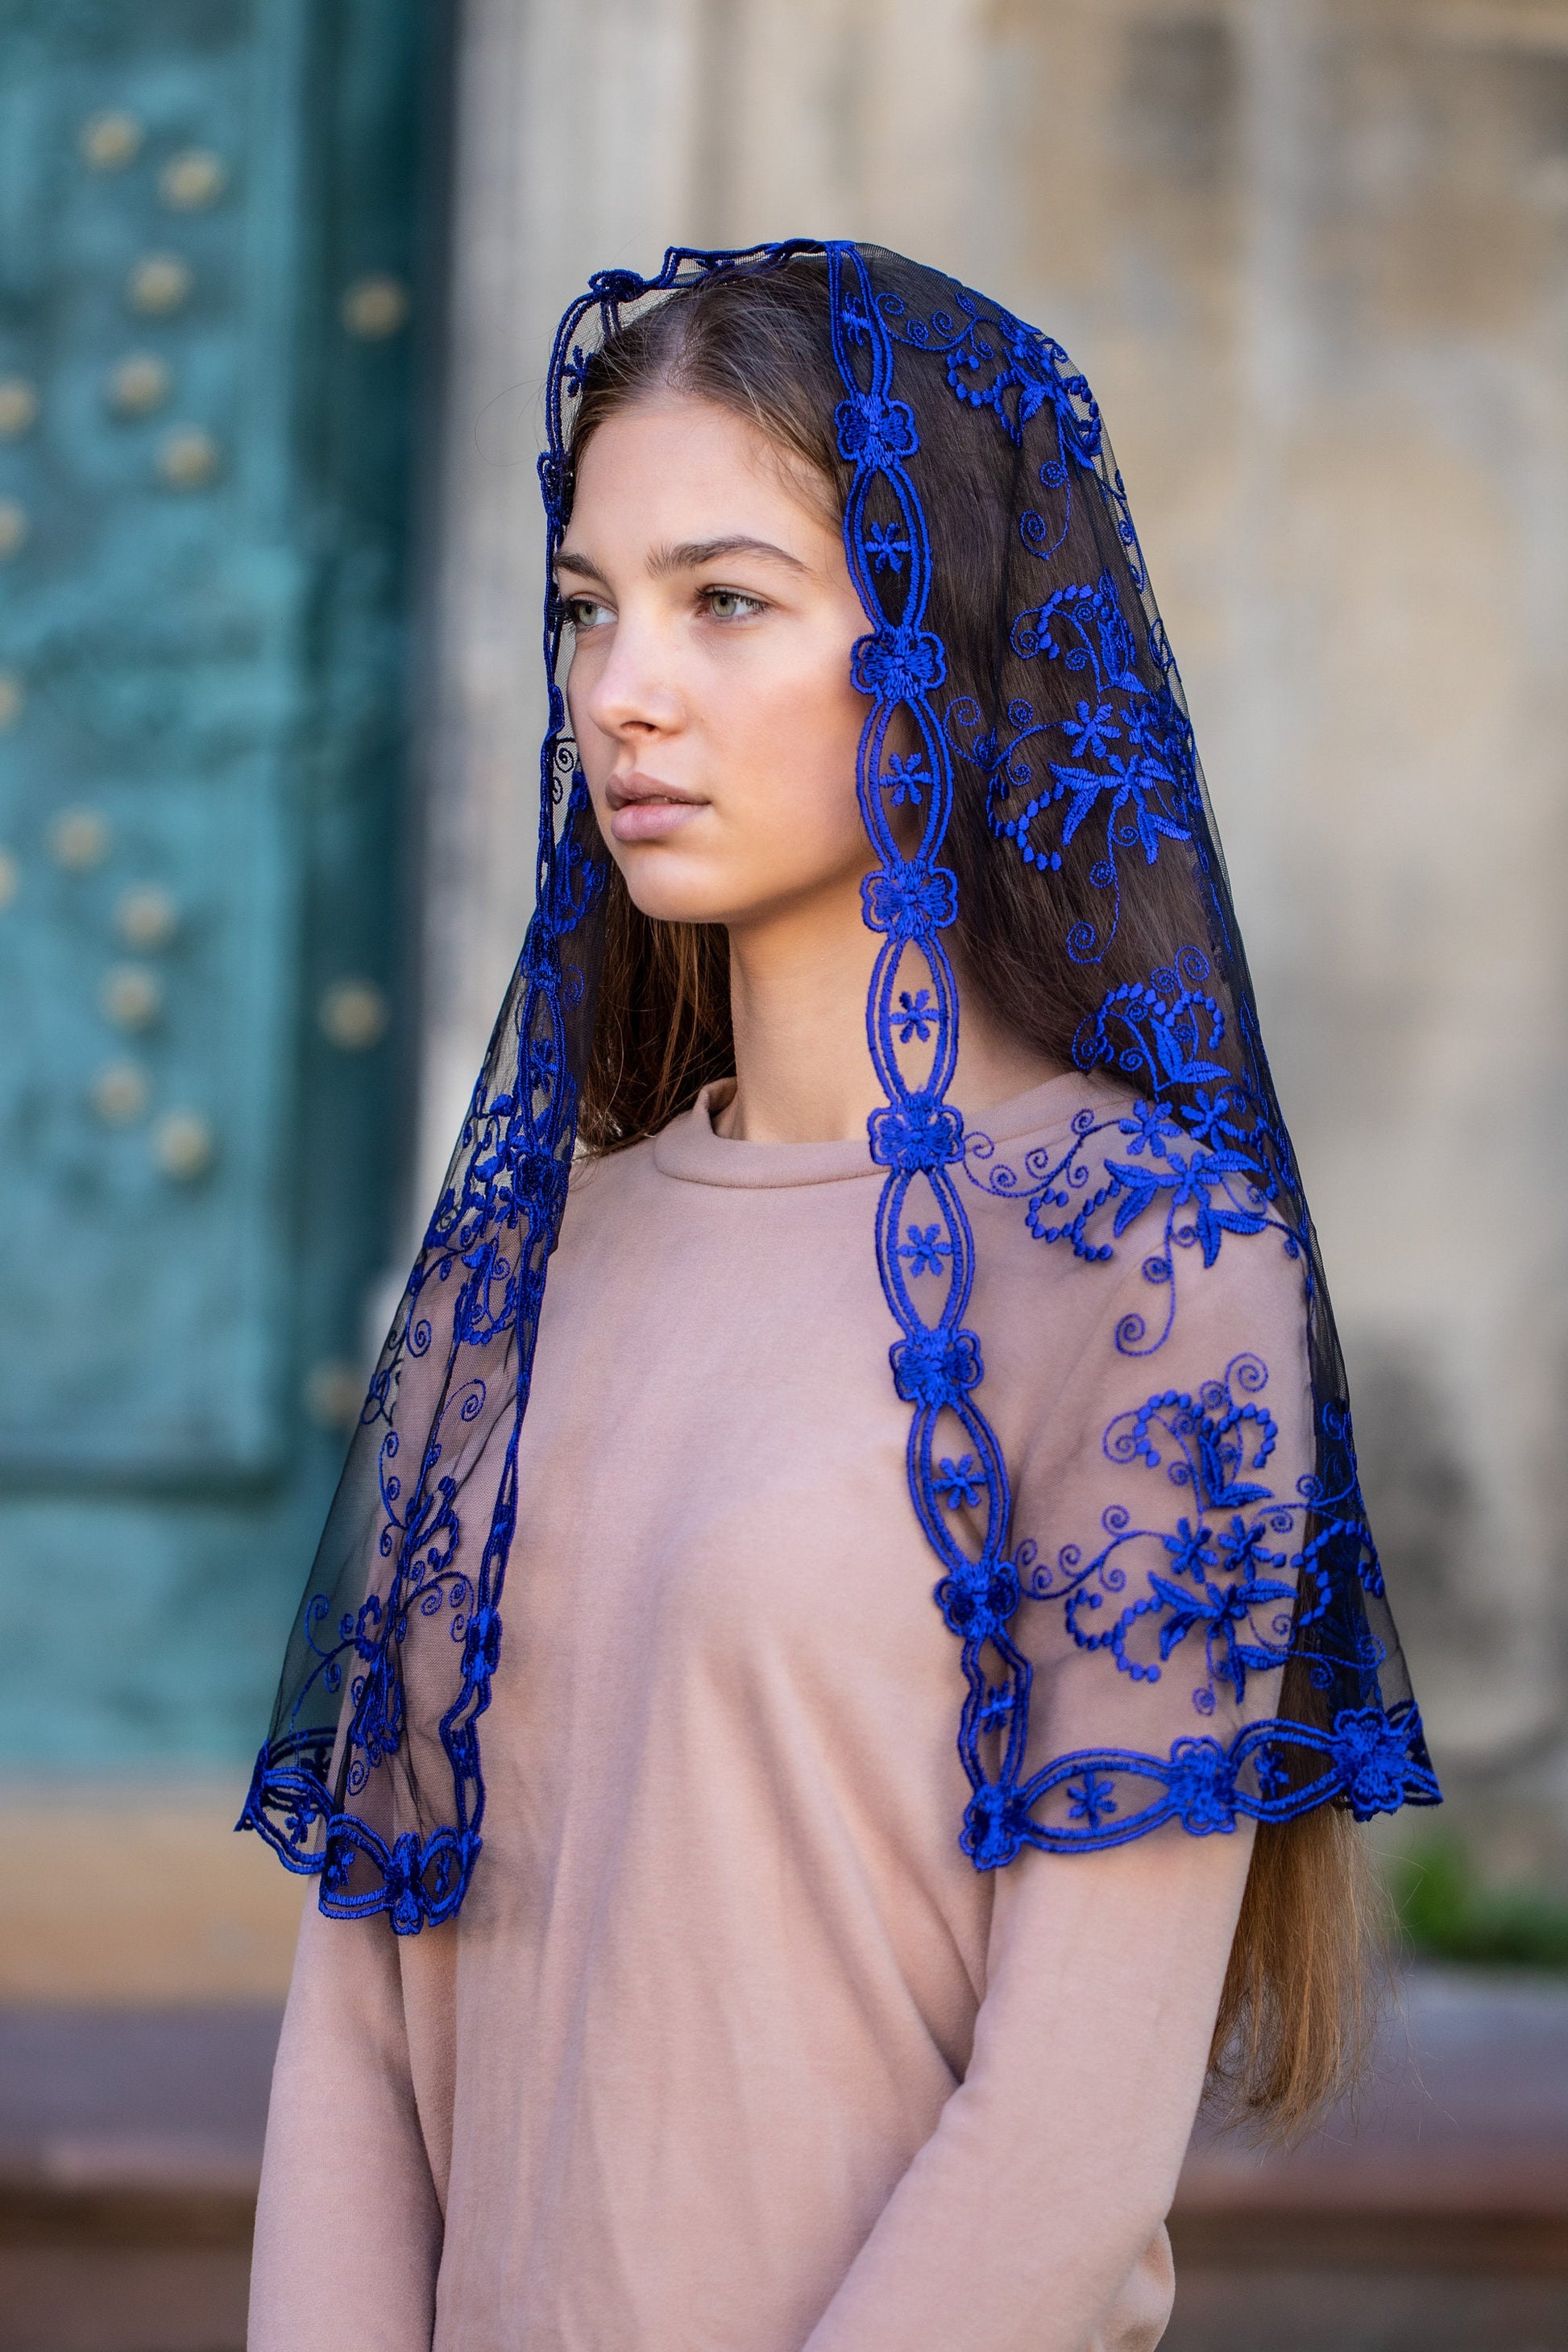 Blue Our Lady of Guadalupe veil - Maria Veils